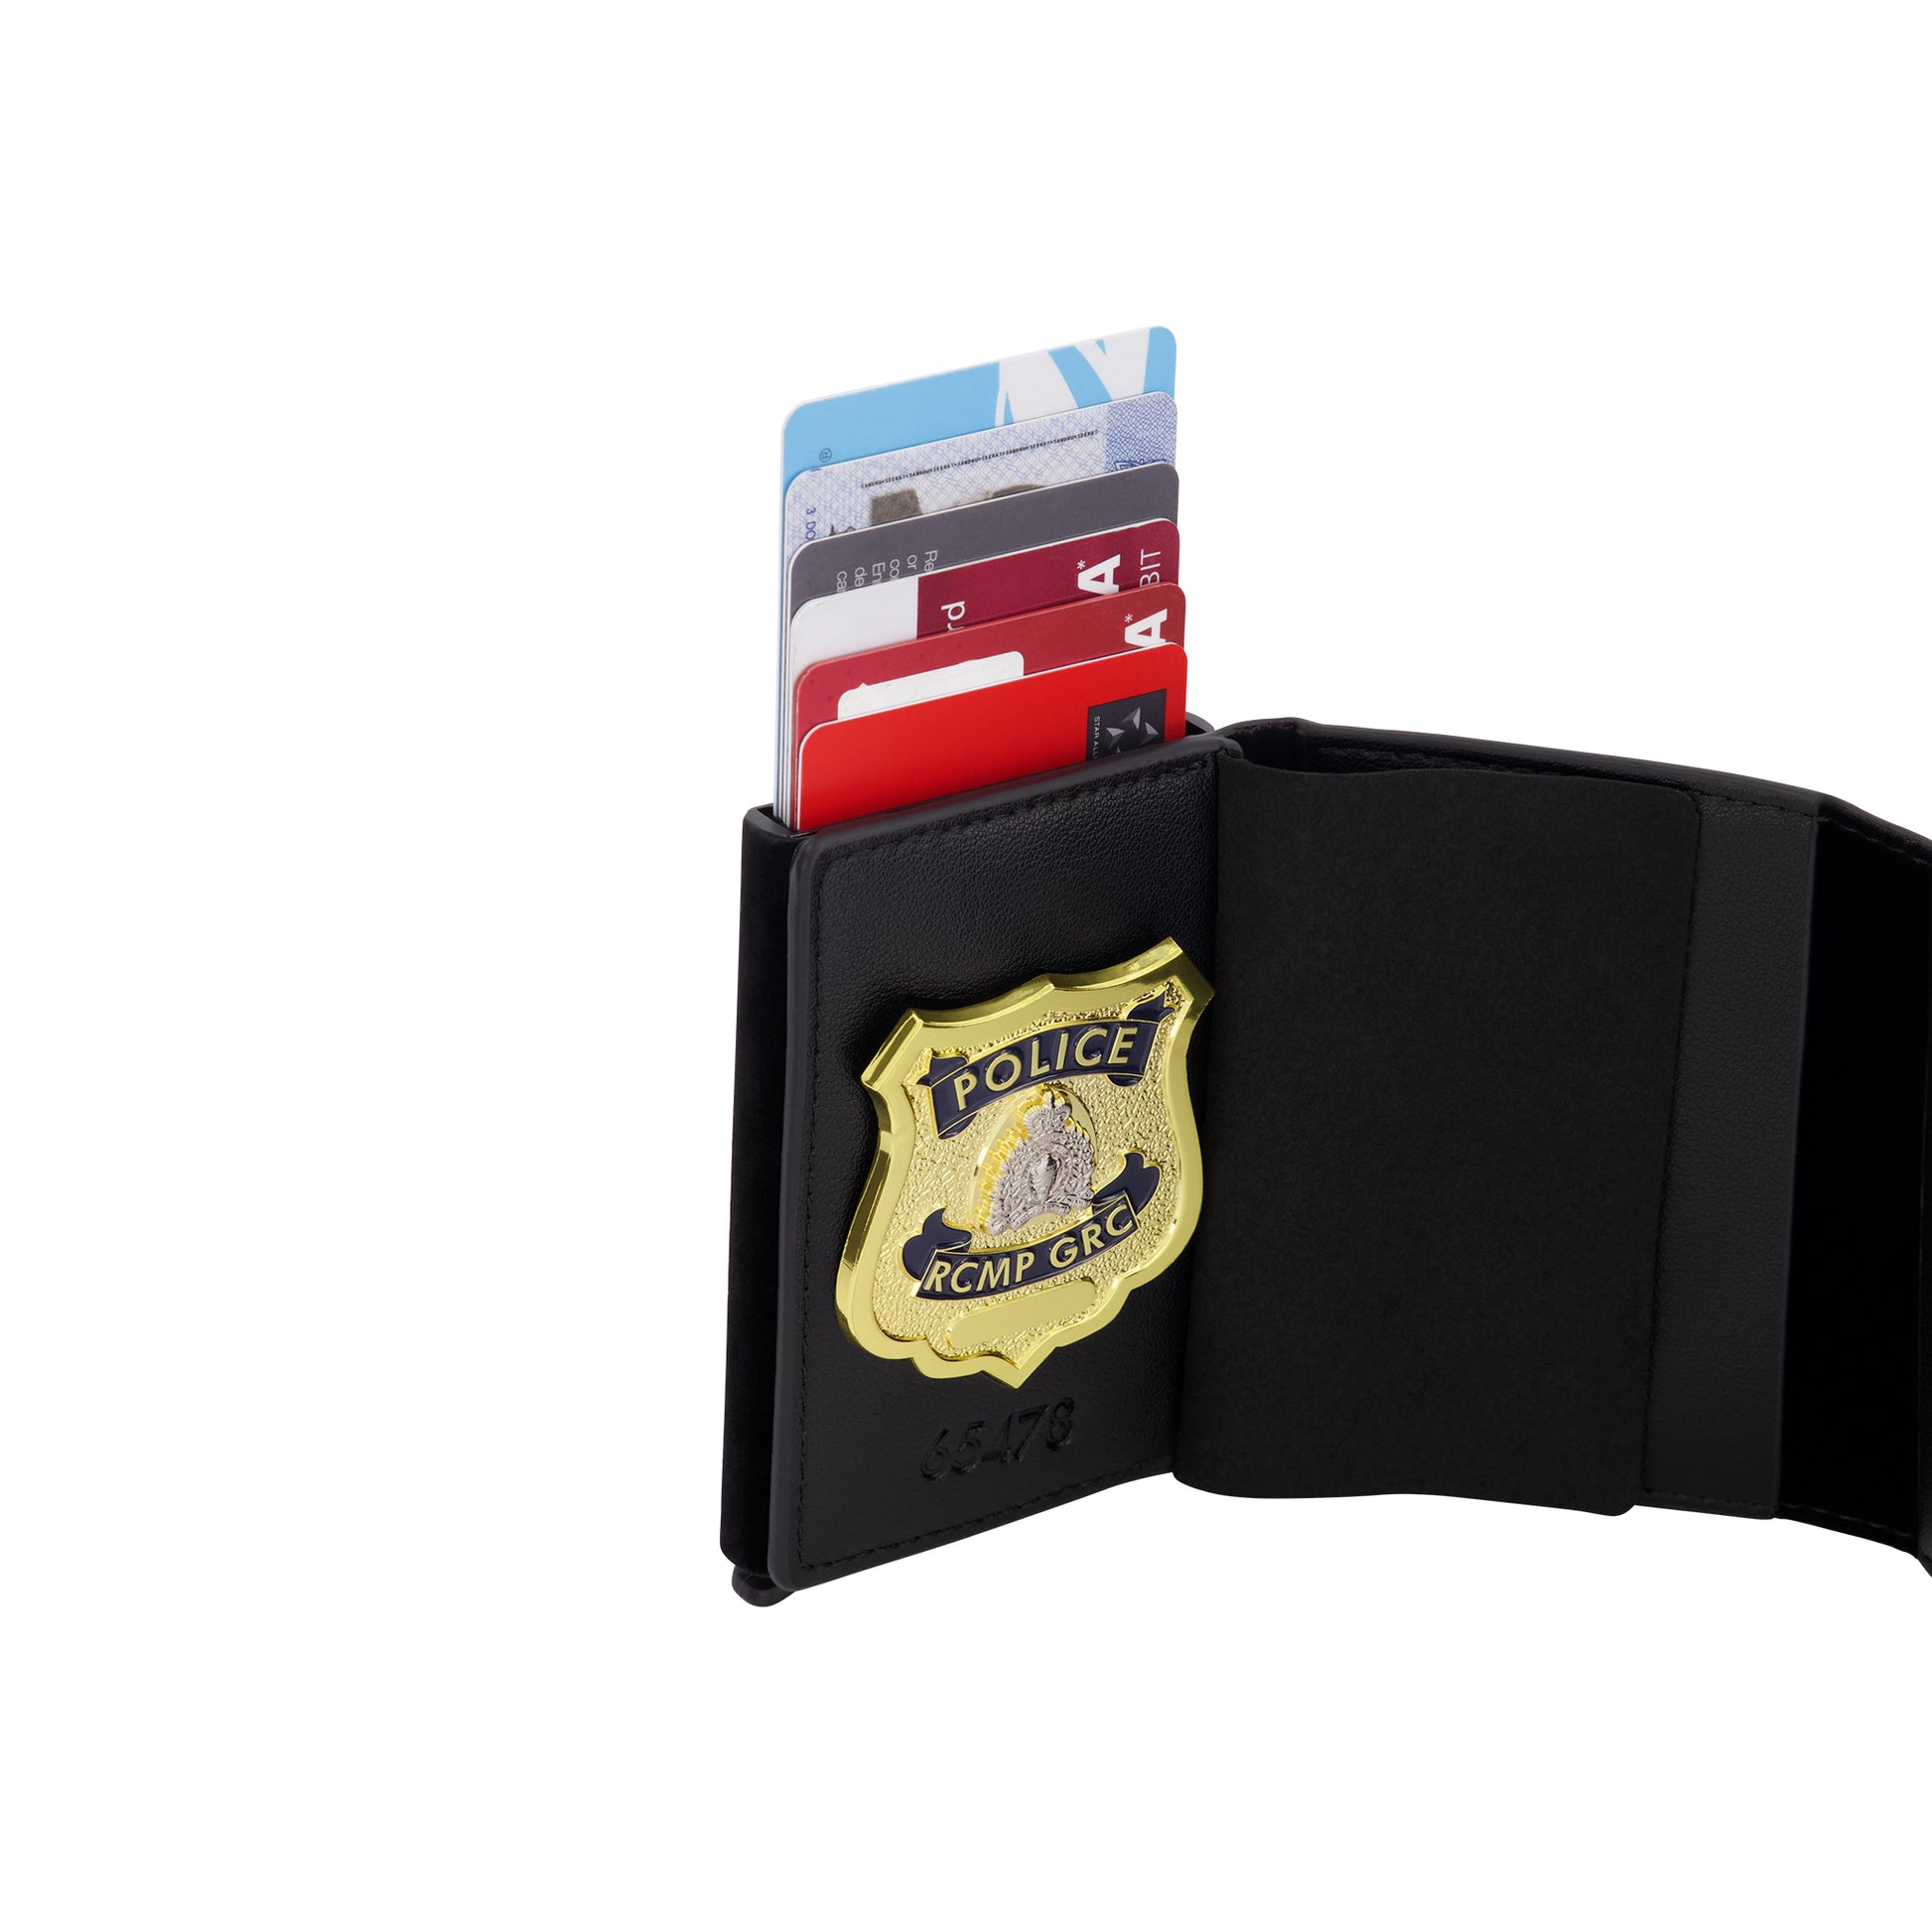 Buy Police Badge Holders with the Best Prices ✓